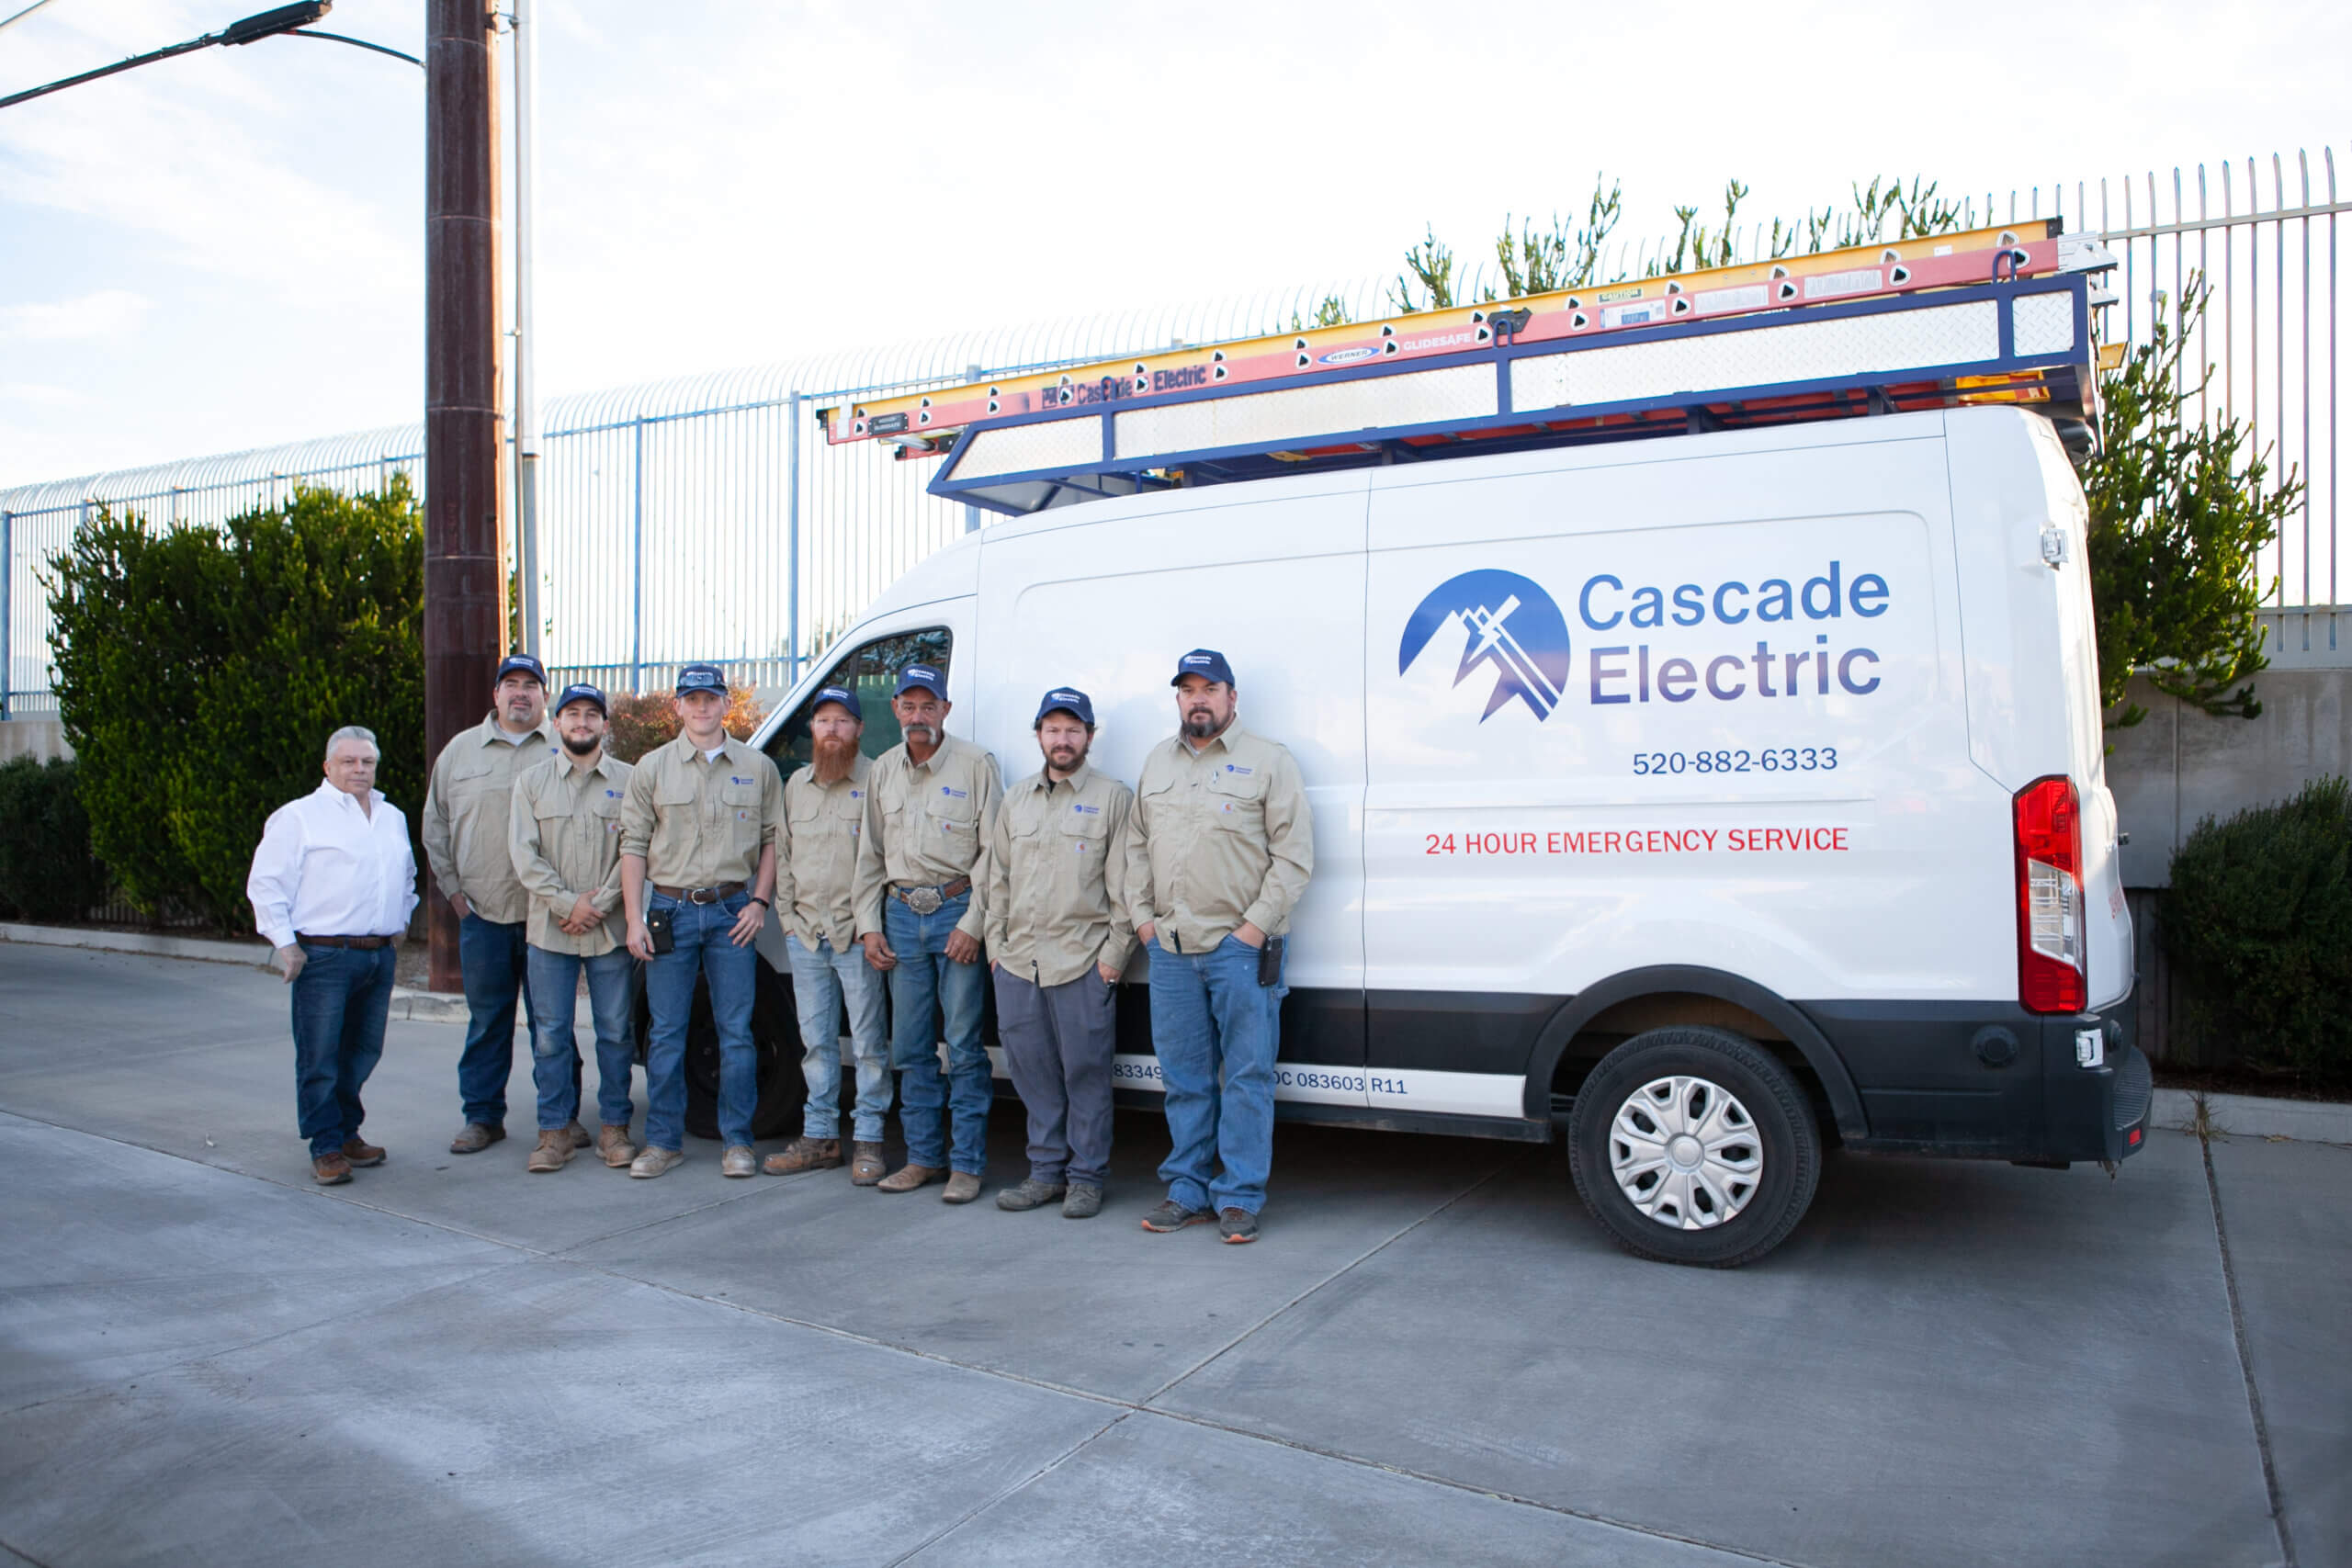 Team of 8 electricians standing in front of a Cascade Electric truck